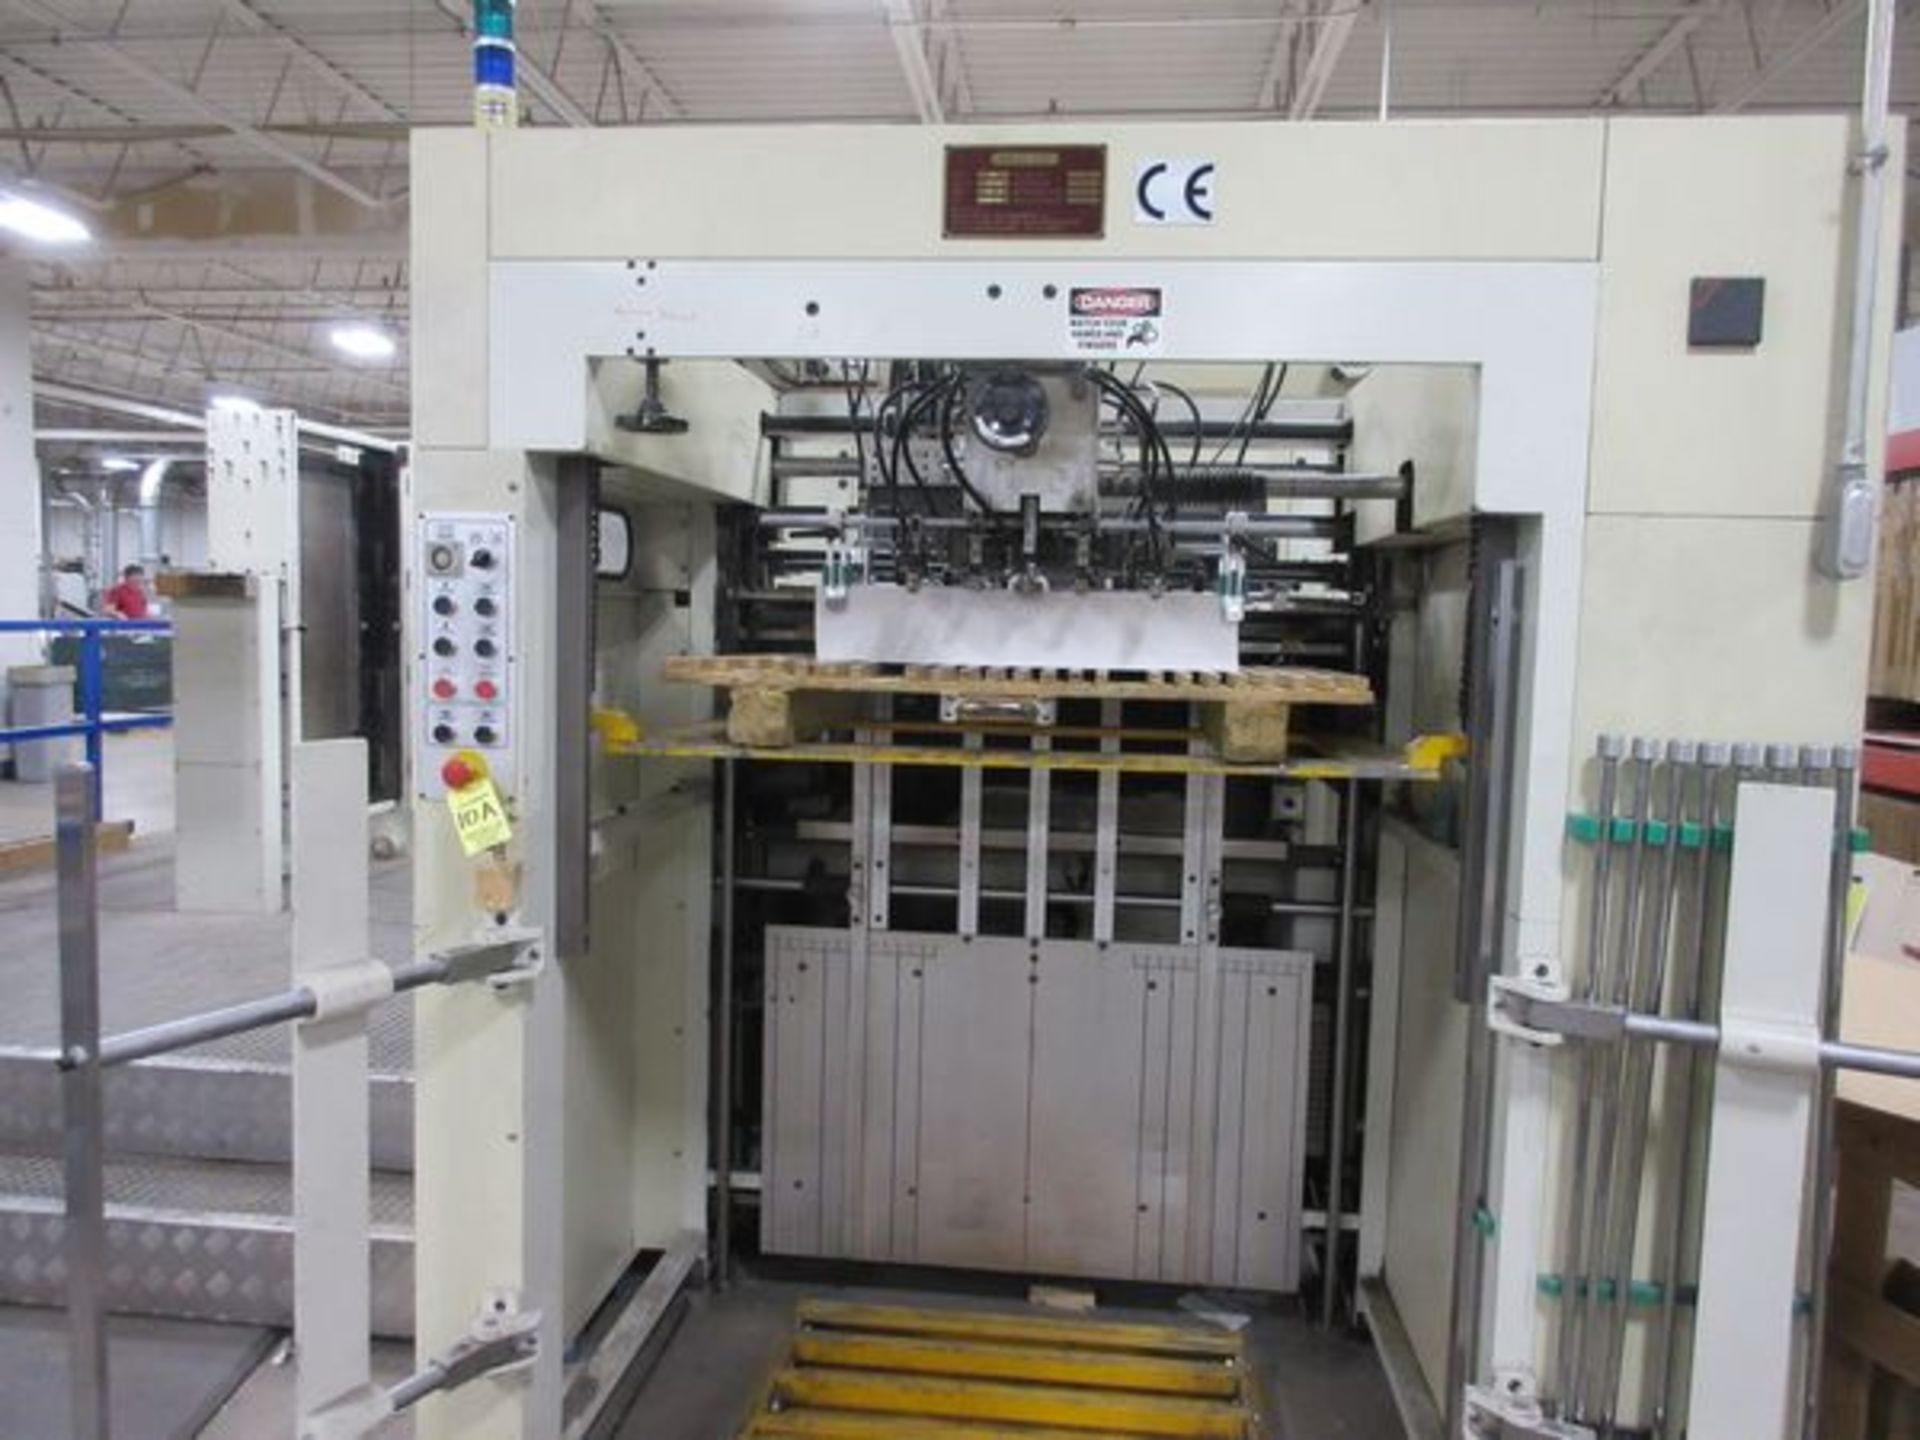 2007 Brausse Model 1050-SE Automatic Platen Die Cutter, s/n JZ-22148, 1050mm x 750mm Max Cutting - Image 3 of 16